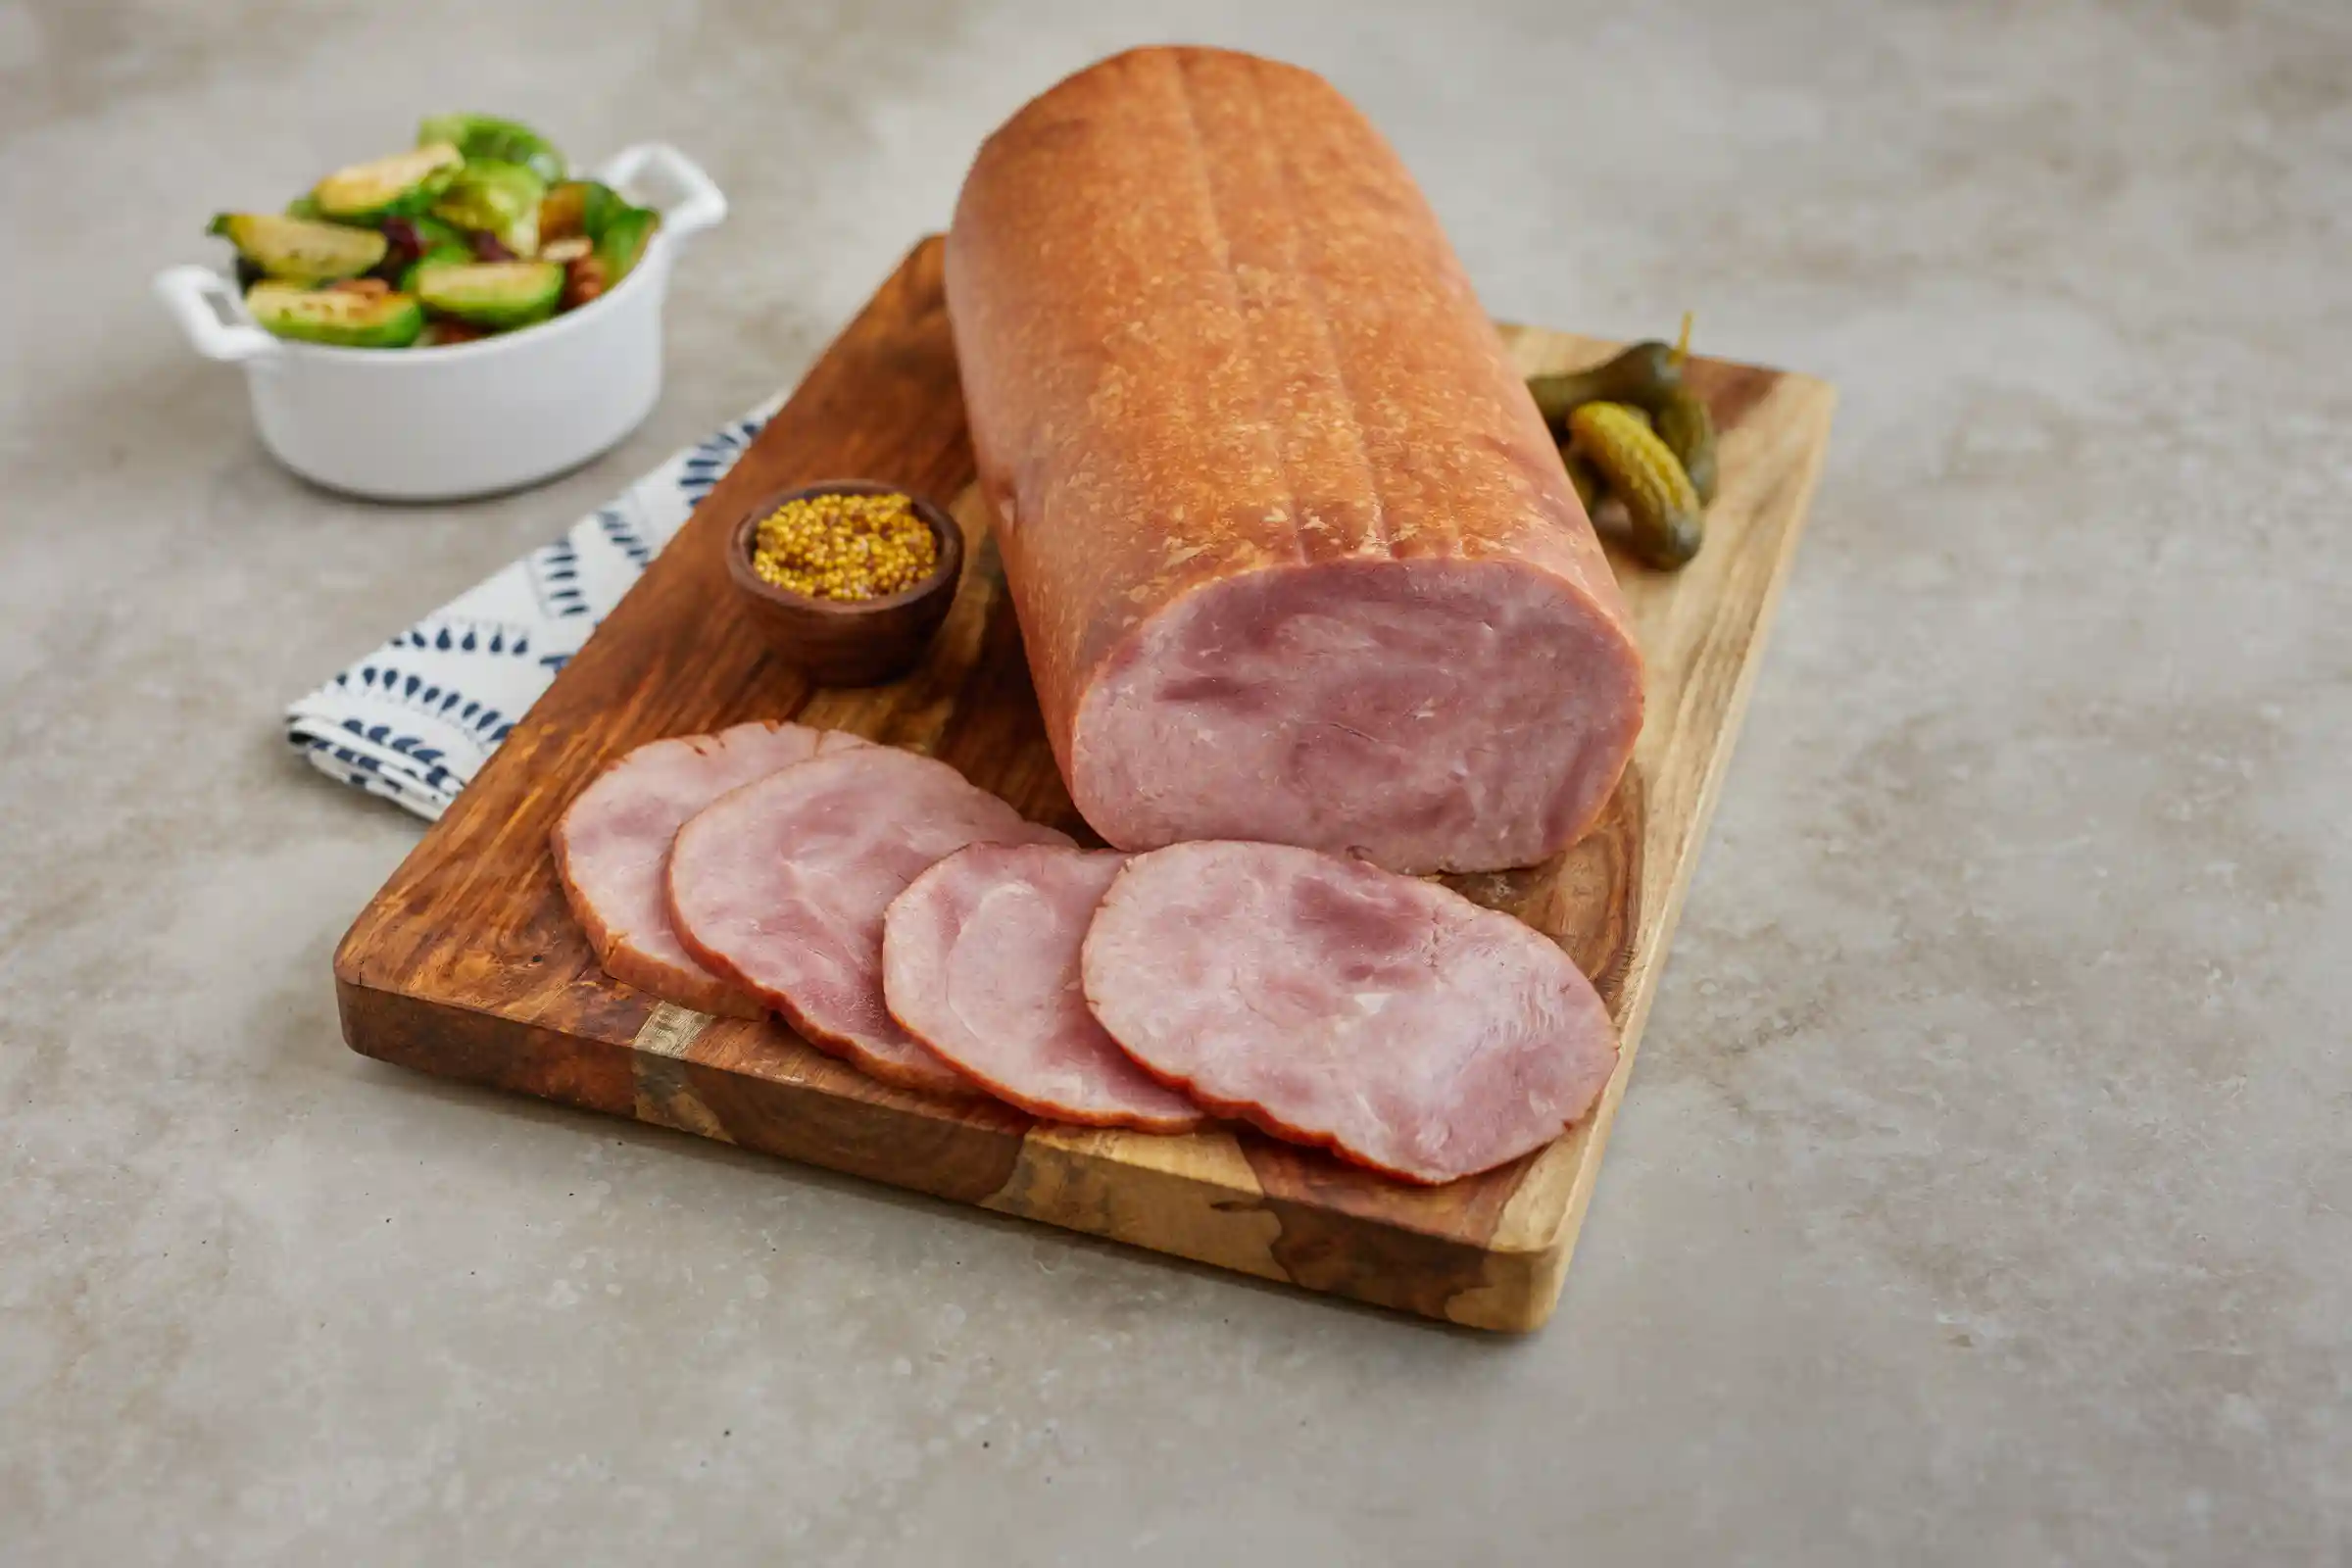 Briar Street Market® Fully Cooked Boneless Smoked Ham & Water Product 35% of Weight is AIhttps://images.salsify.com/image/upload/s--0oeDCatD--/q_25/fc2bky6souupfdvefyri.webp